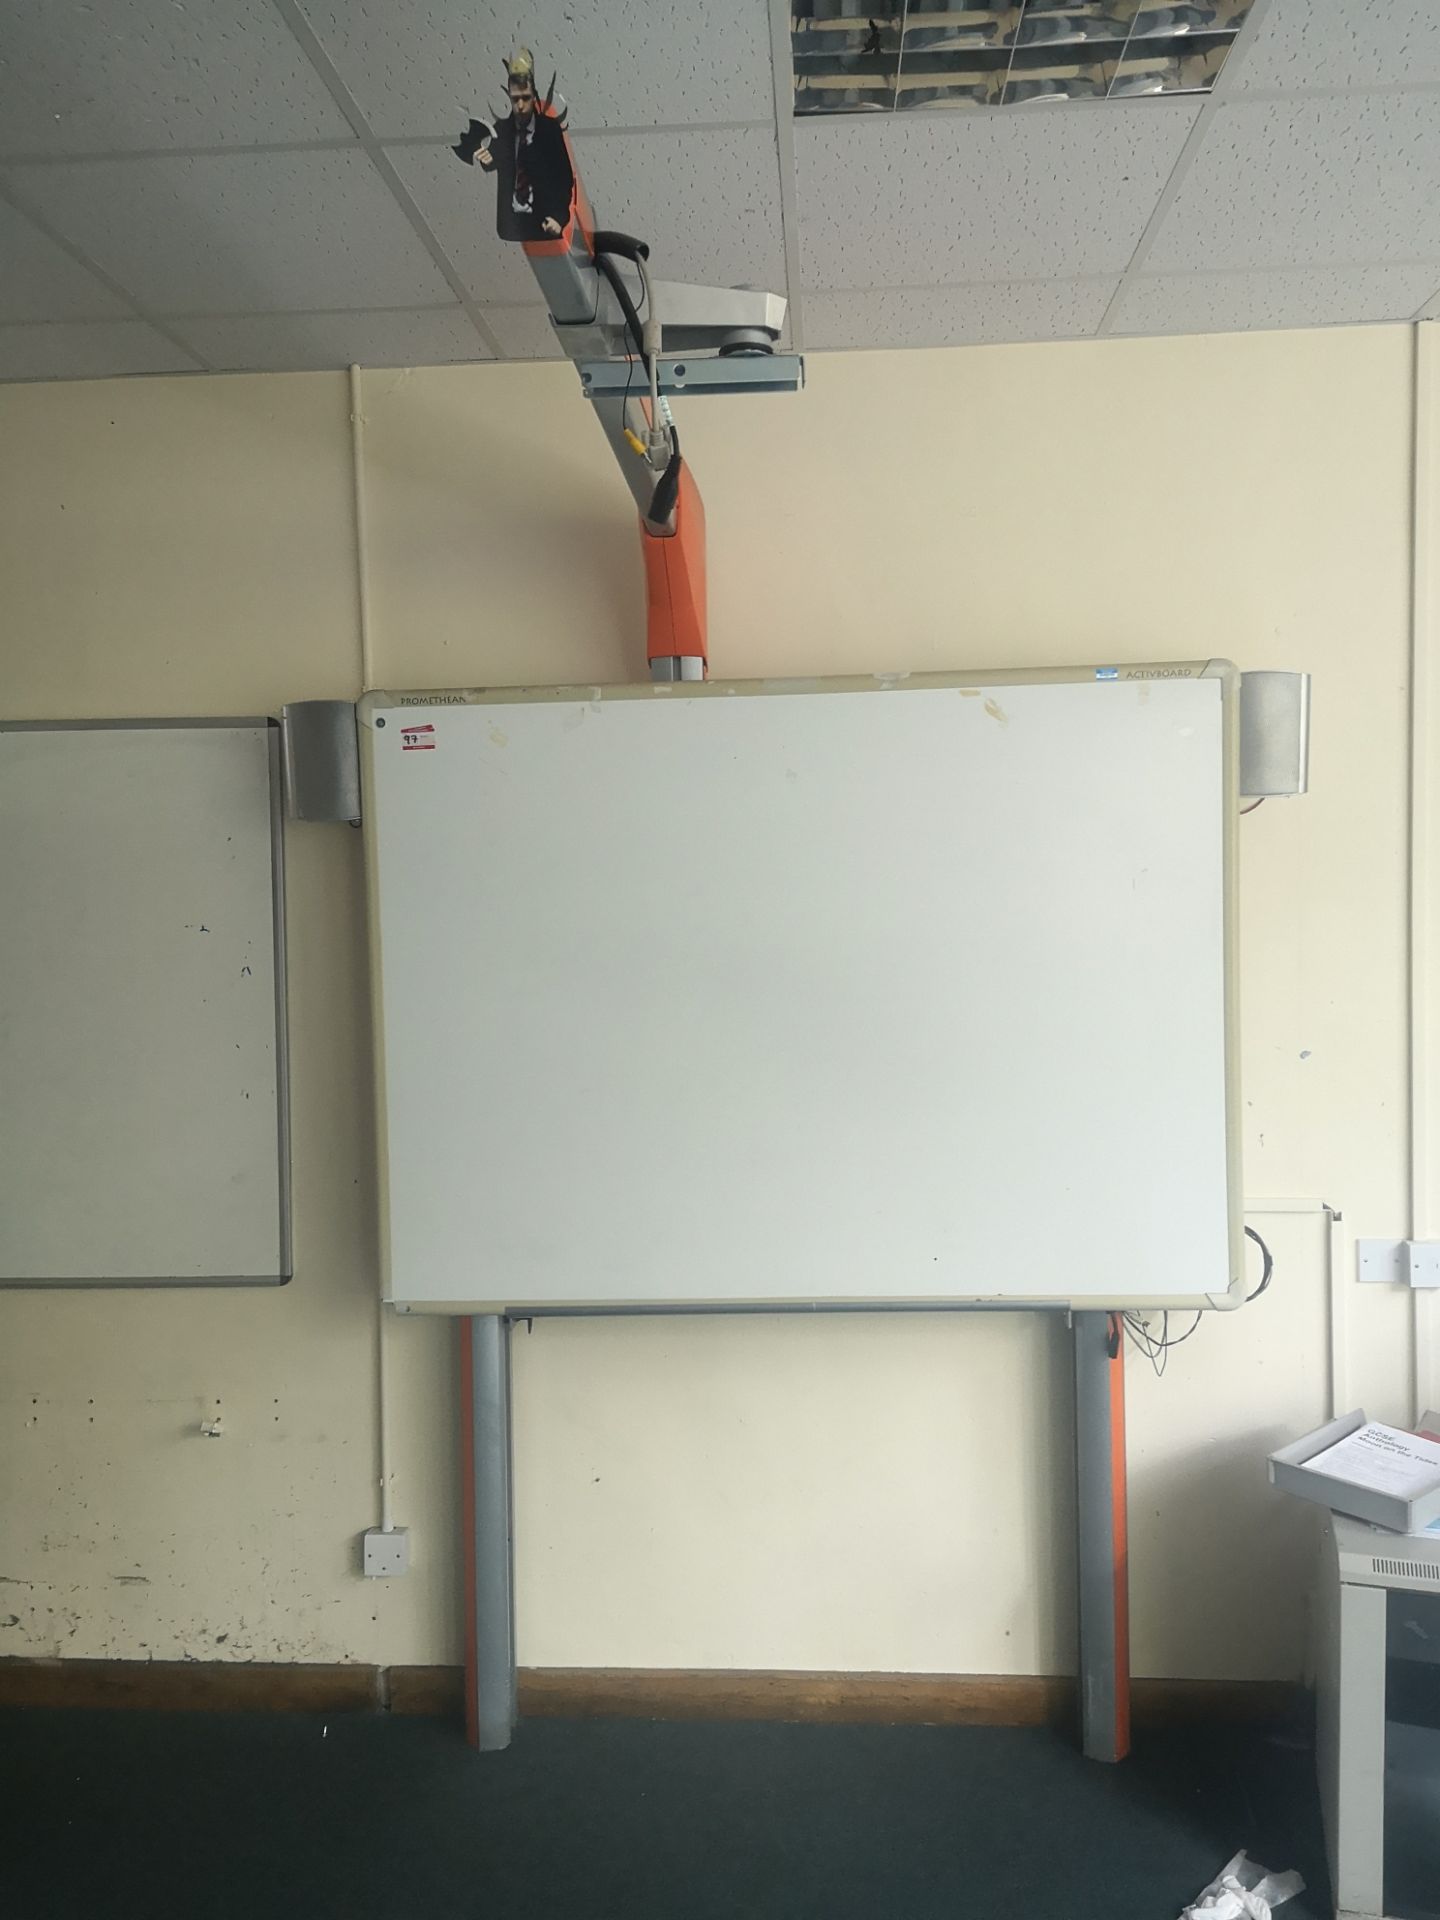 Promethean active board with speakers [on stand]